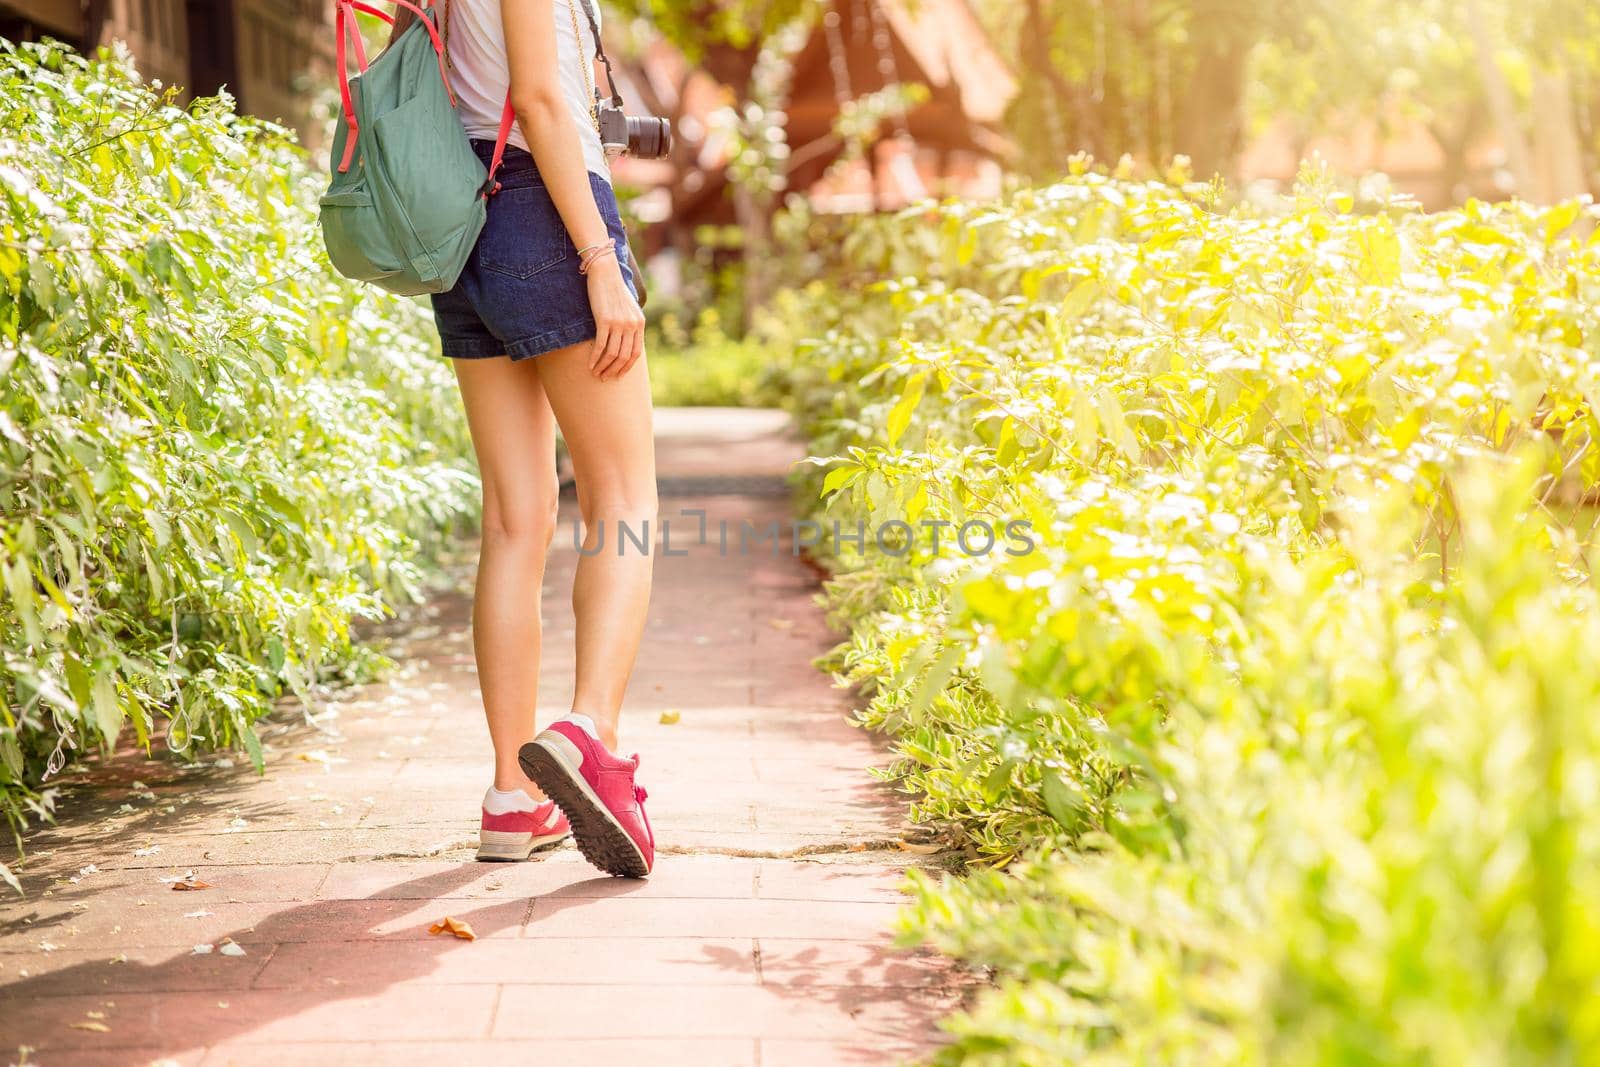 girl teen travel walking in the nature footpath, women tourist walking with hat backpack bag